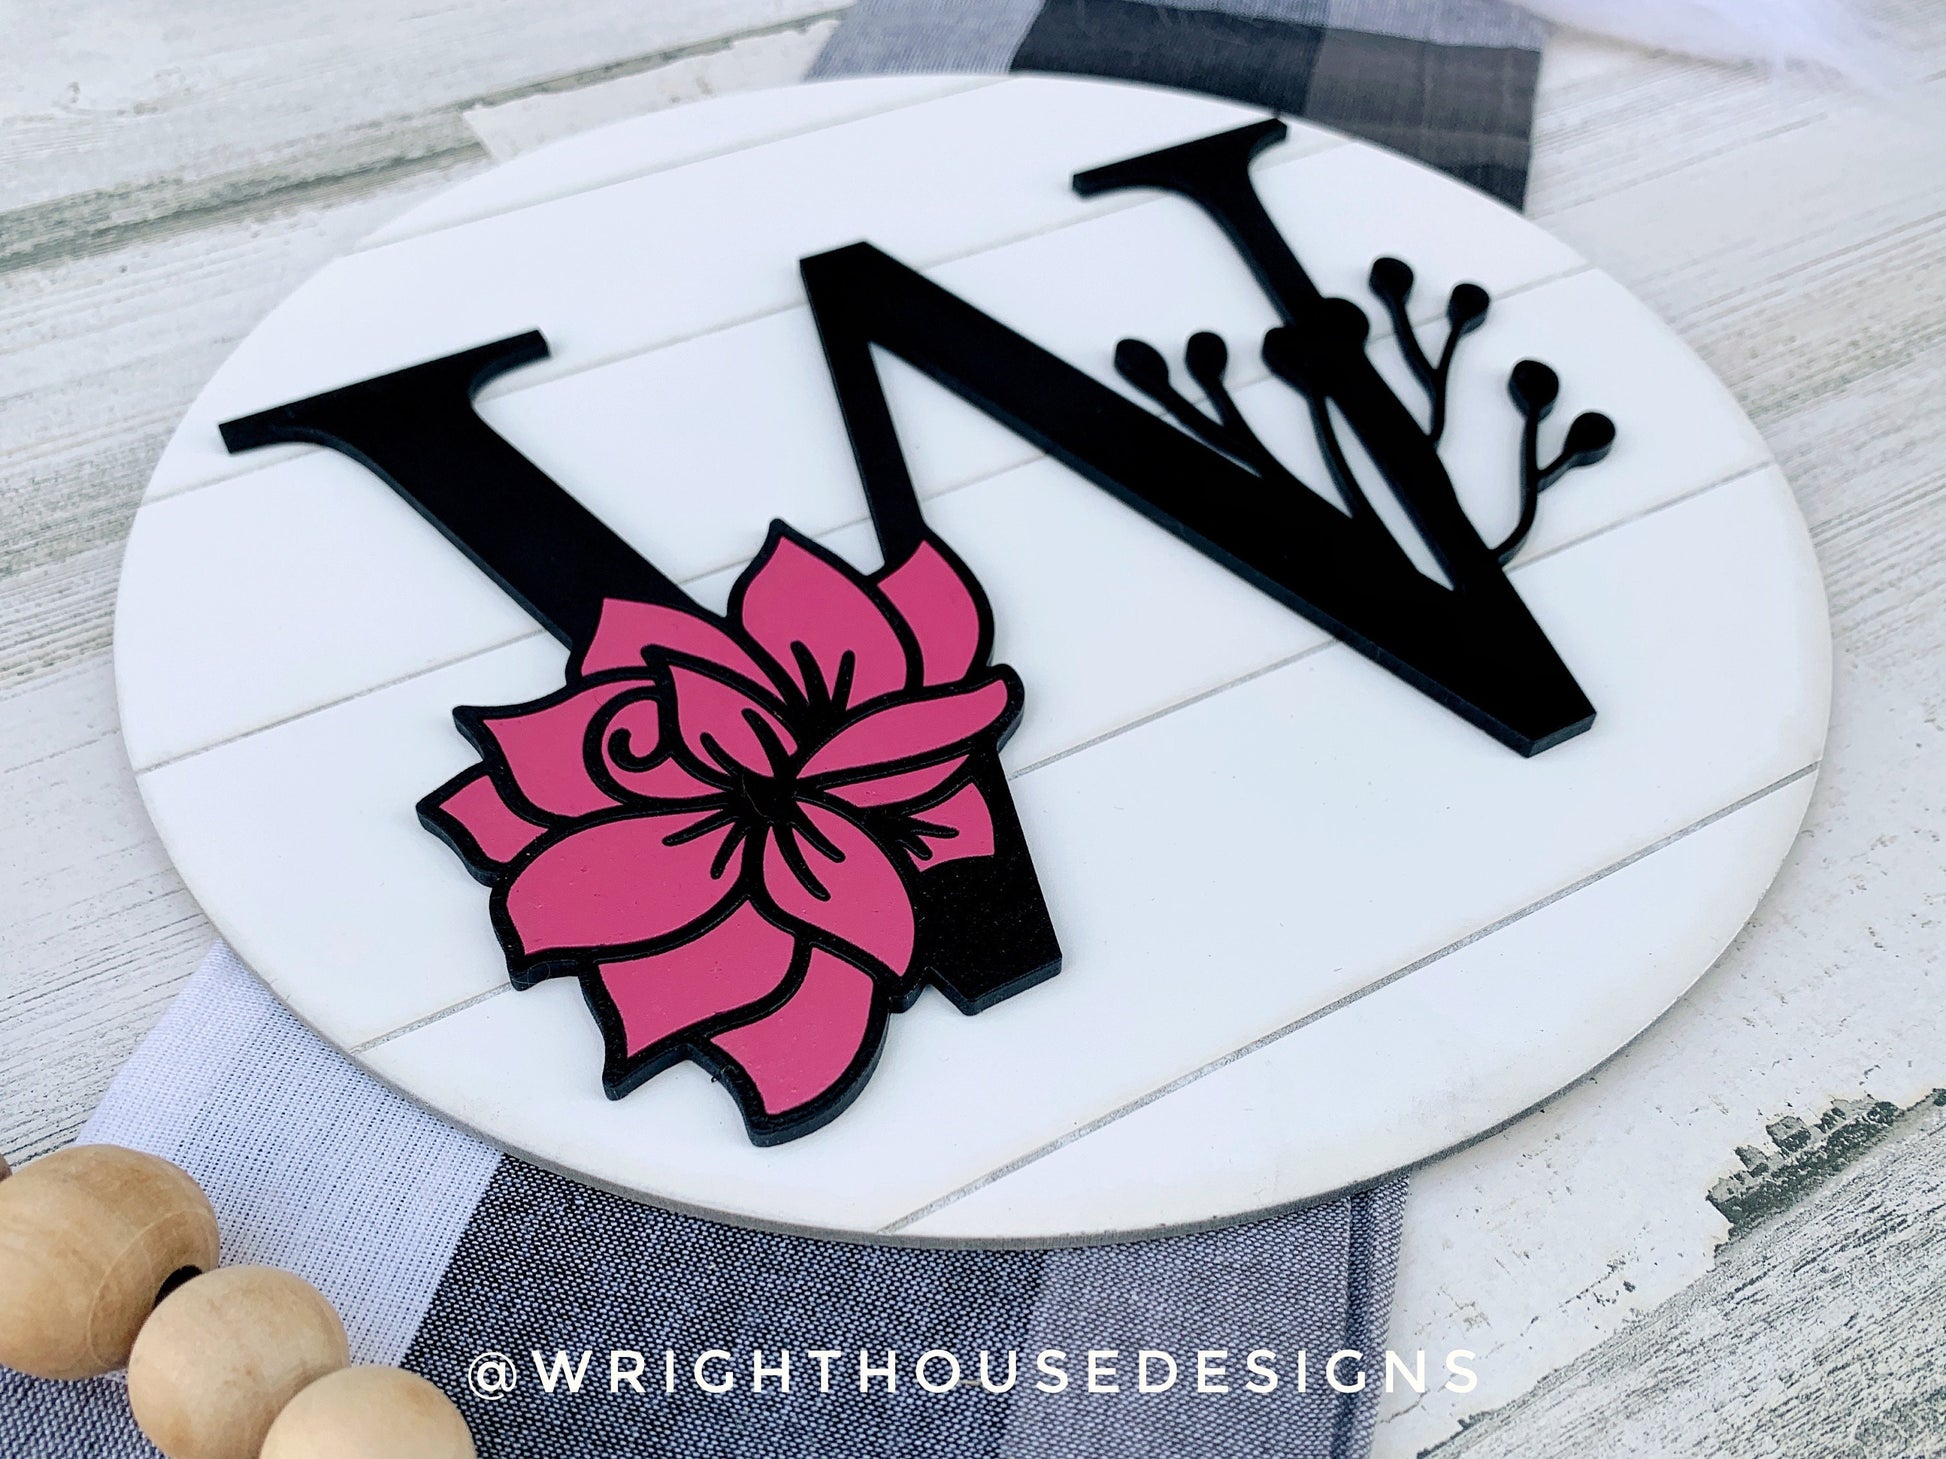 Botanical Floral Personalized Monogram Family Name - Laser Cut Wooden Shiplap Round Sign - Rustic Farmhouse - Southern Style Bookshelf Decor